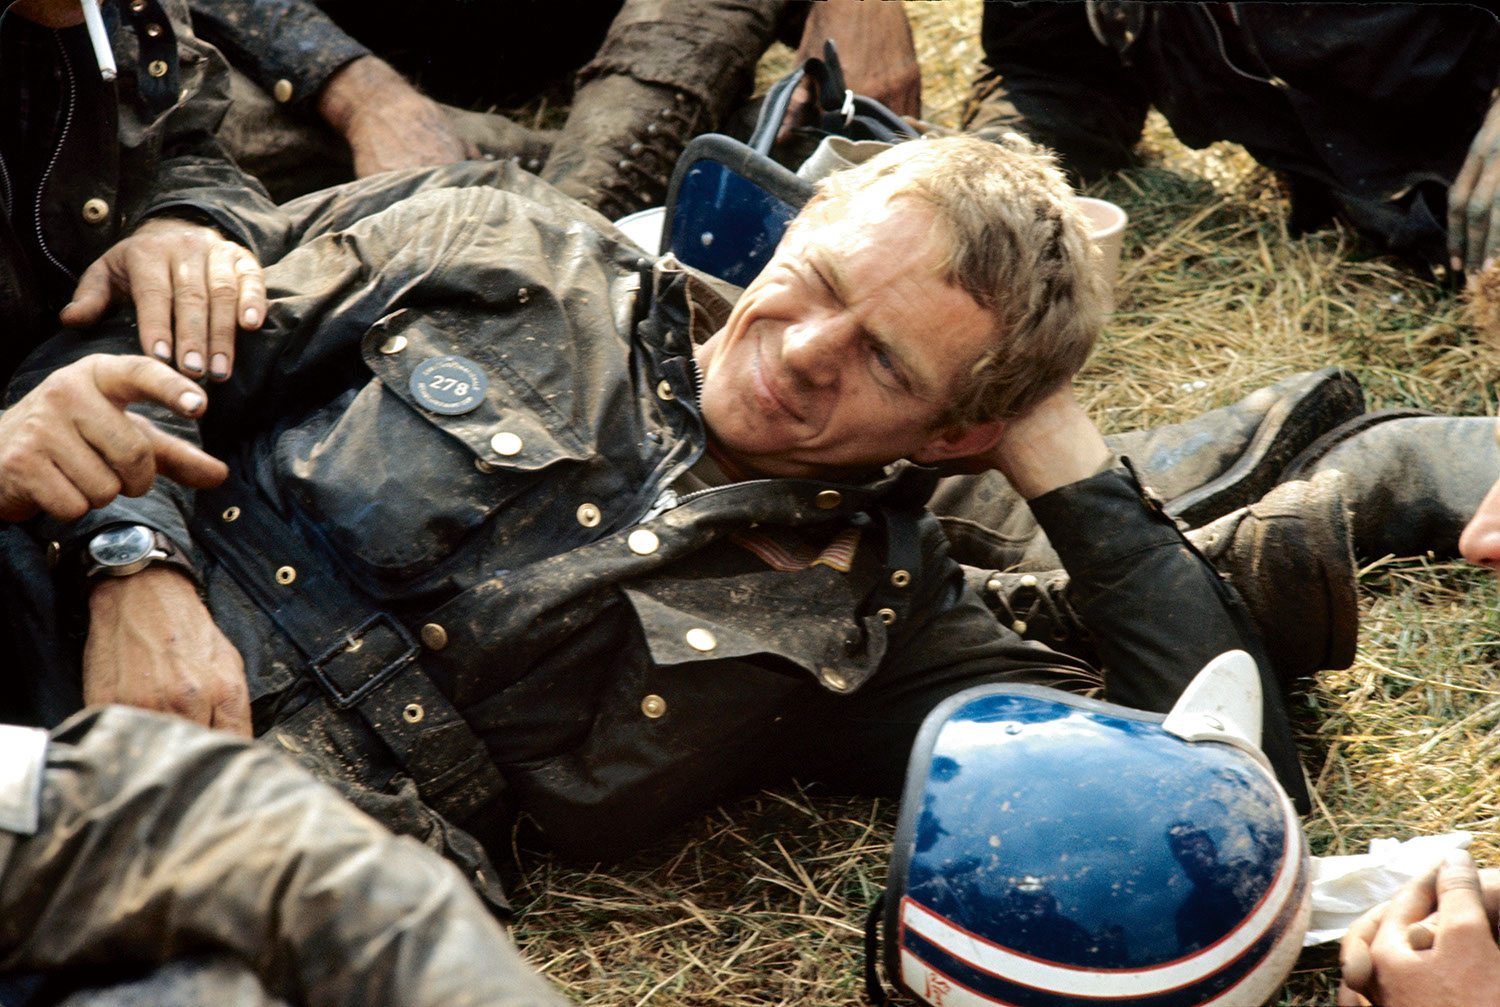 Steve McQueen resting after his run out on the 1964 ISDT track. Each evening after the race (300km on average, on terrible paths), the runners used to collapse on the grass, covered in mud and oil. On his wrist visible is the Hanhart 417 ES (Photo by Francois Gragnon / Paris Match via Getty Images)